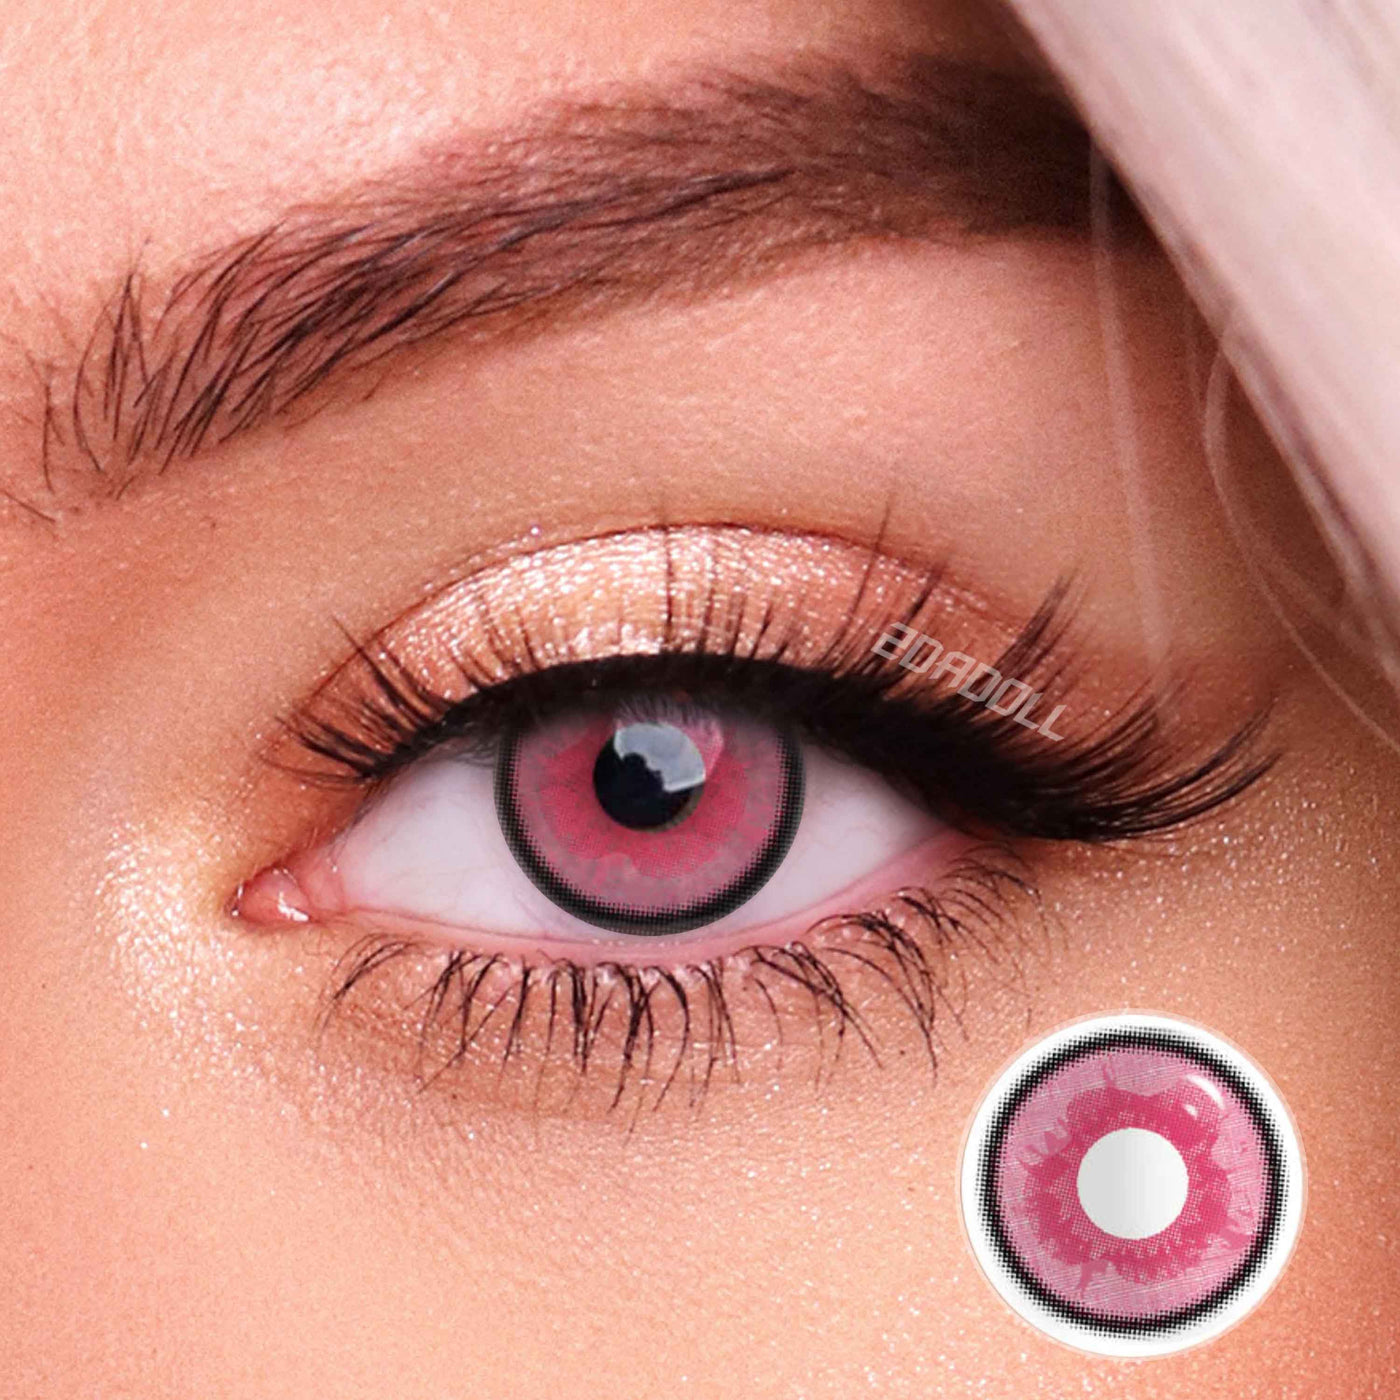 2Dadoll Demon Slayer Pink Contact Lenses(1 pair/6 months)